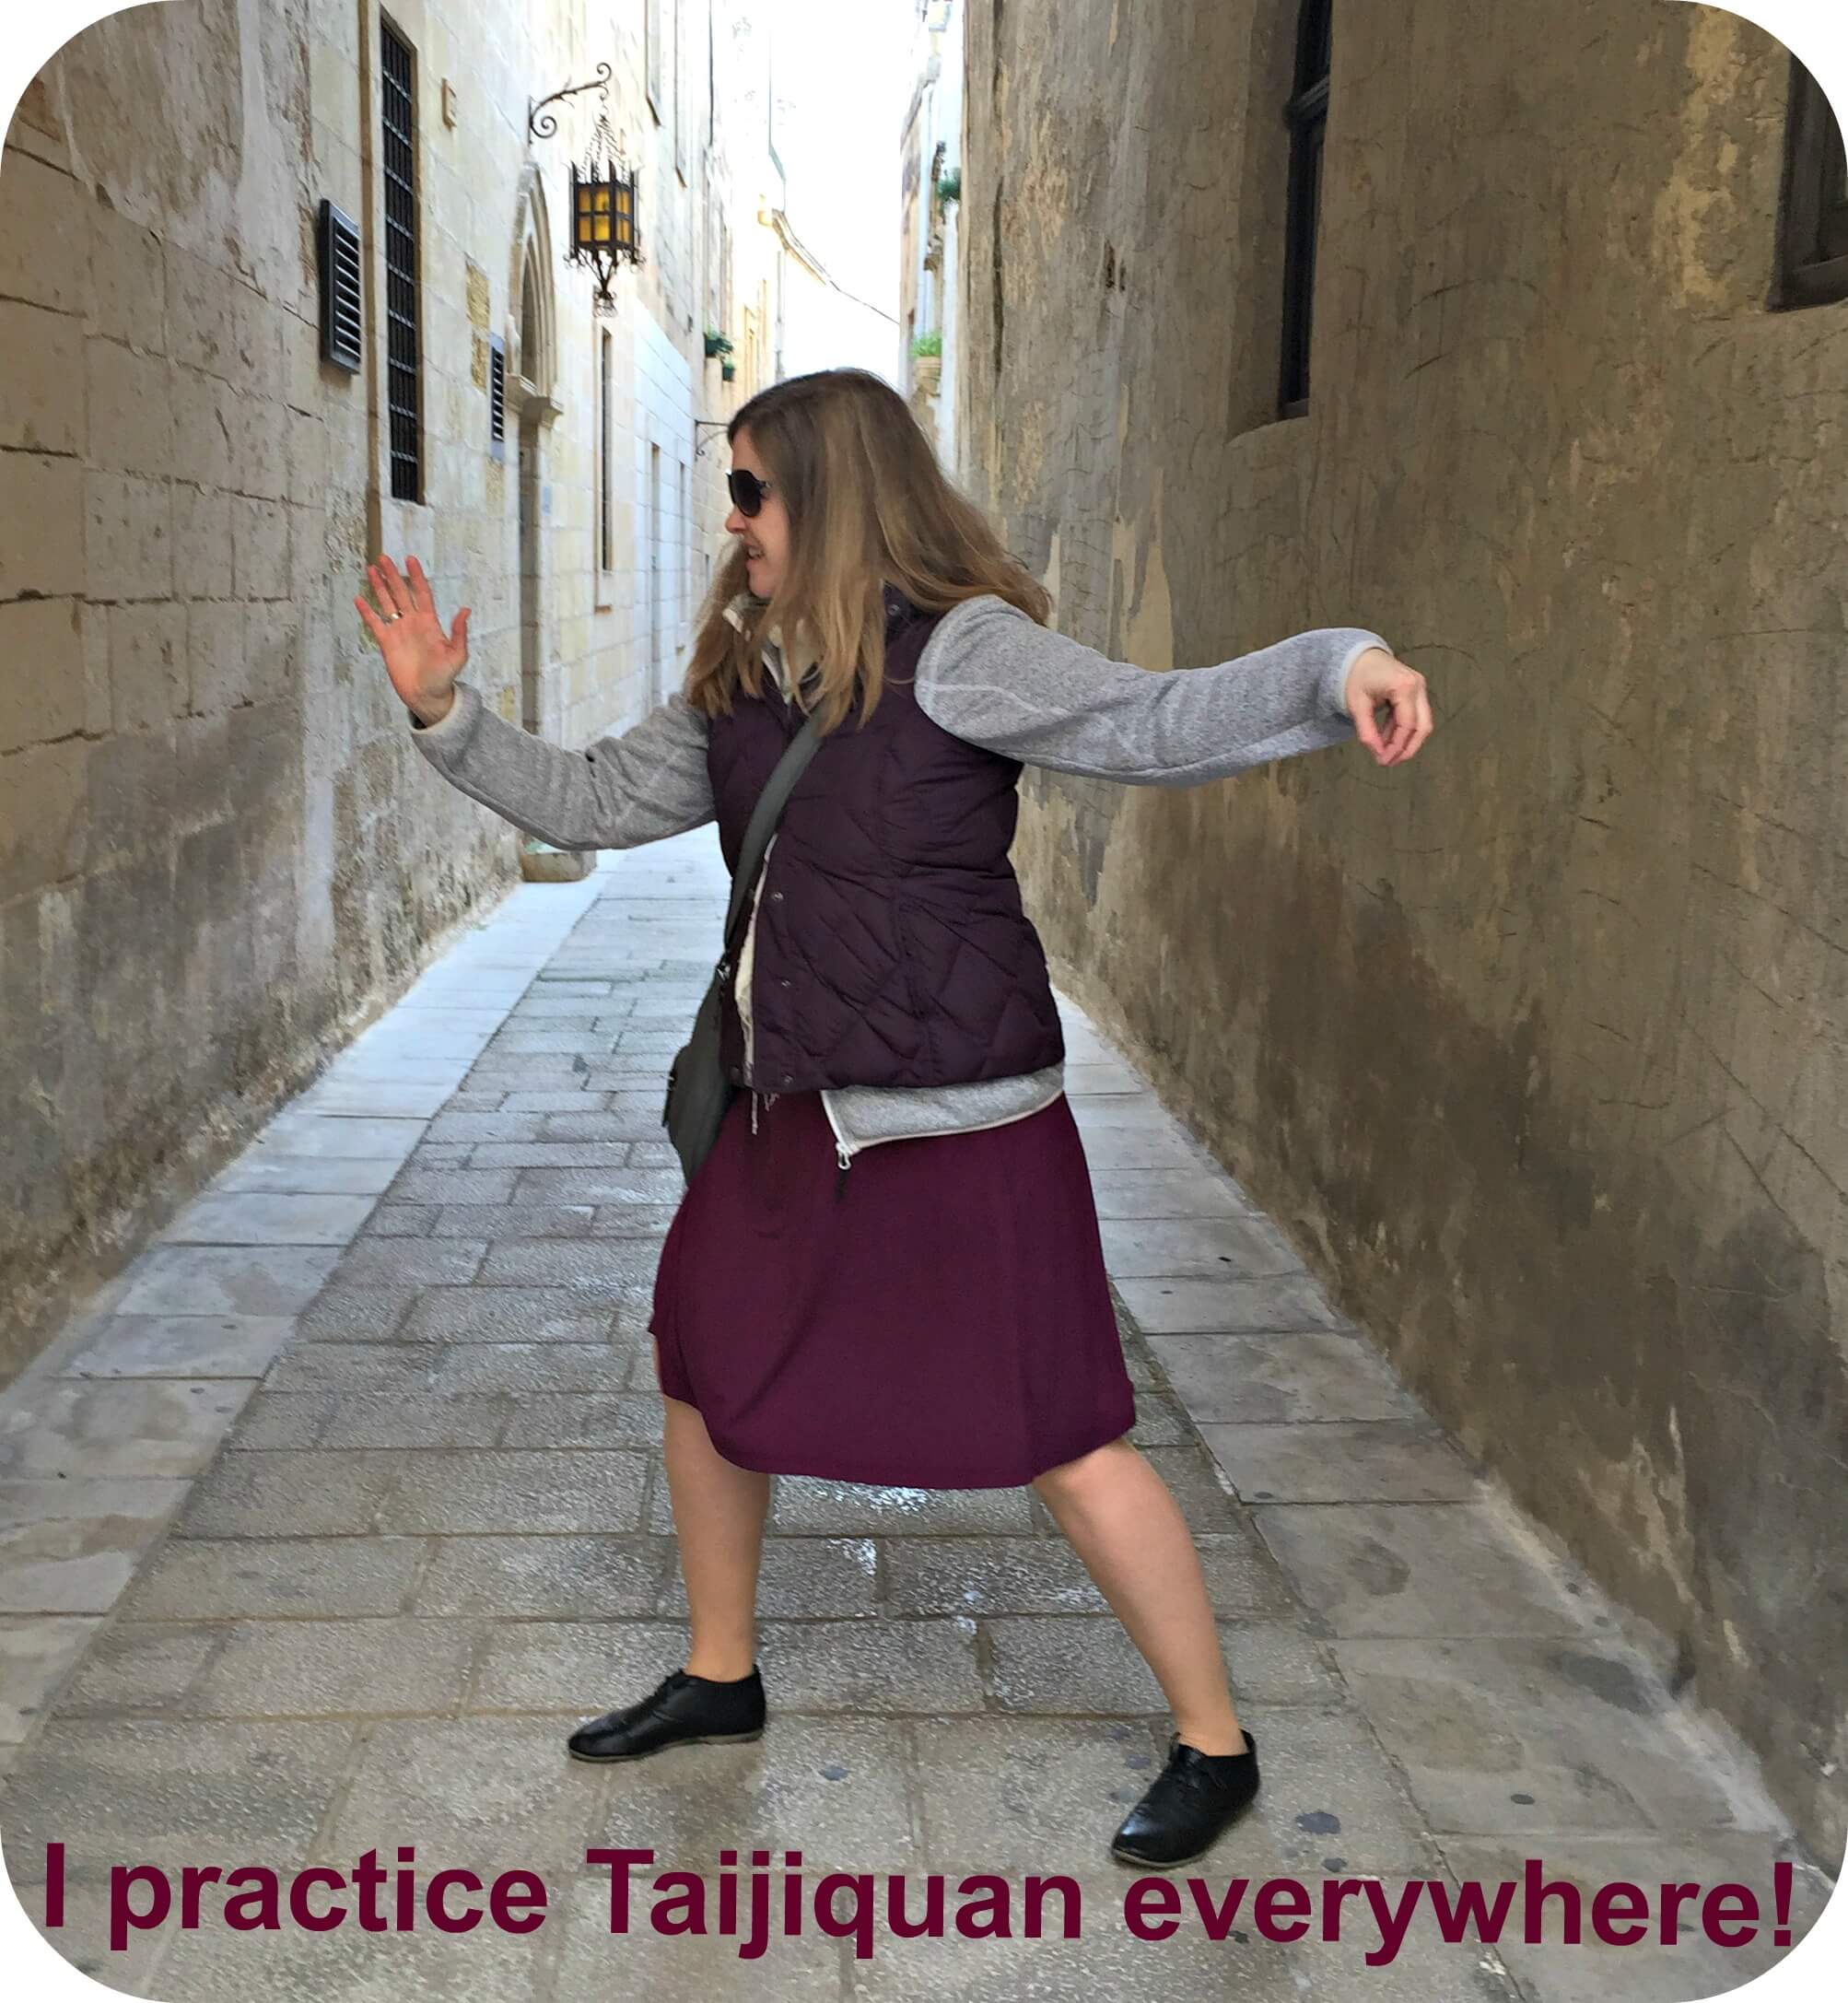 Angelika (blogger at Qialance) practices Taijiquan in old street of Mdina (Malta)